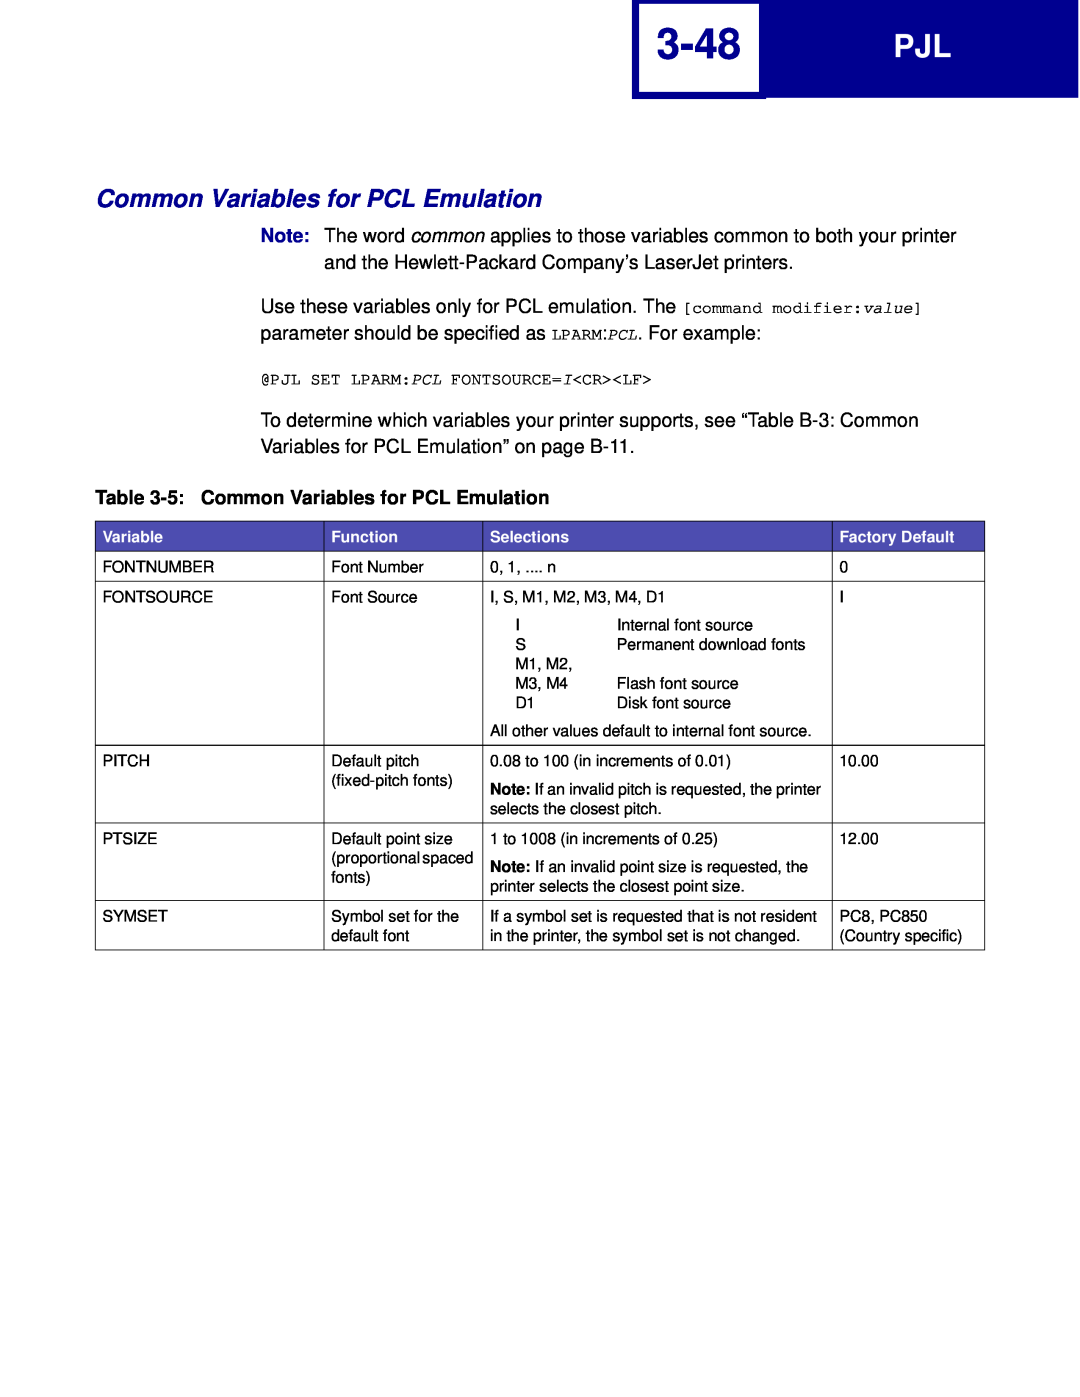 Lexmark C762, C760 manual 3-48, 5 Common Variables for PCL Emulation 